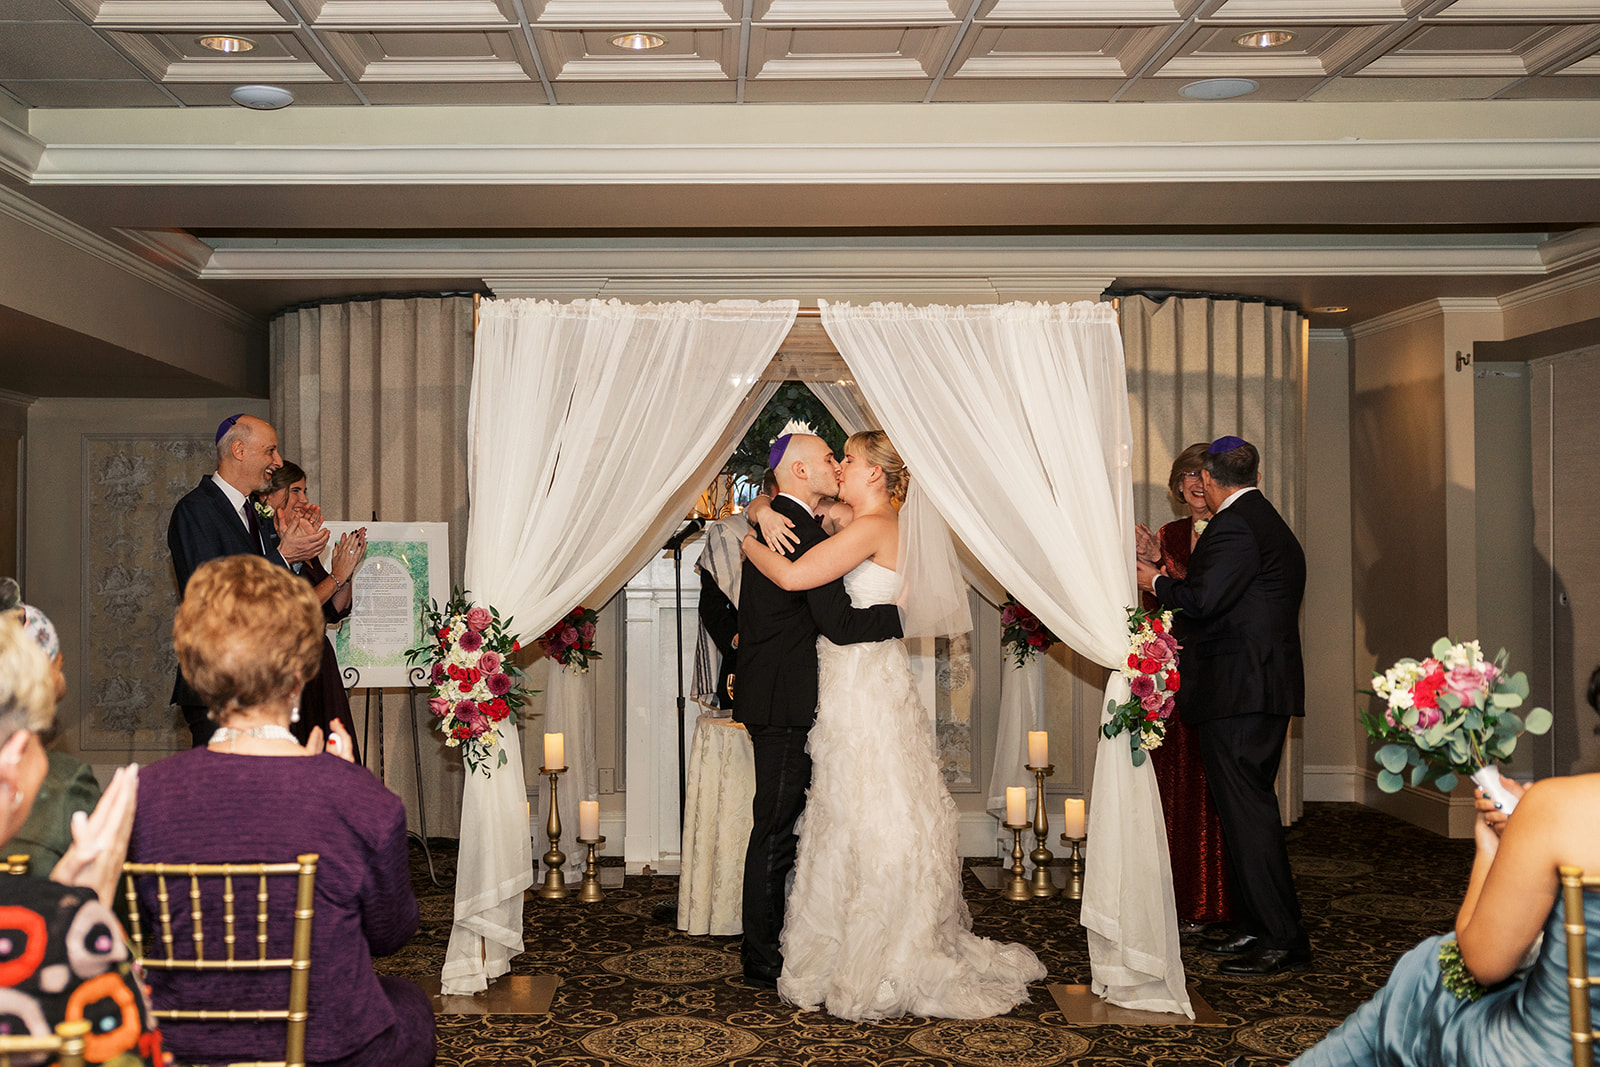 Newlyweds kiss at the altar to applause at the end of their ceremony